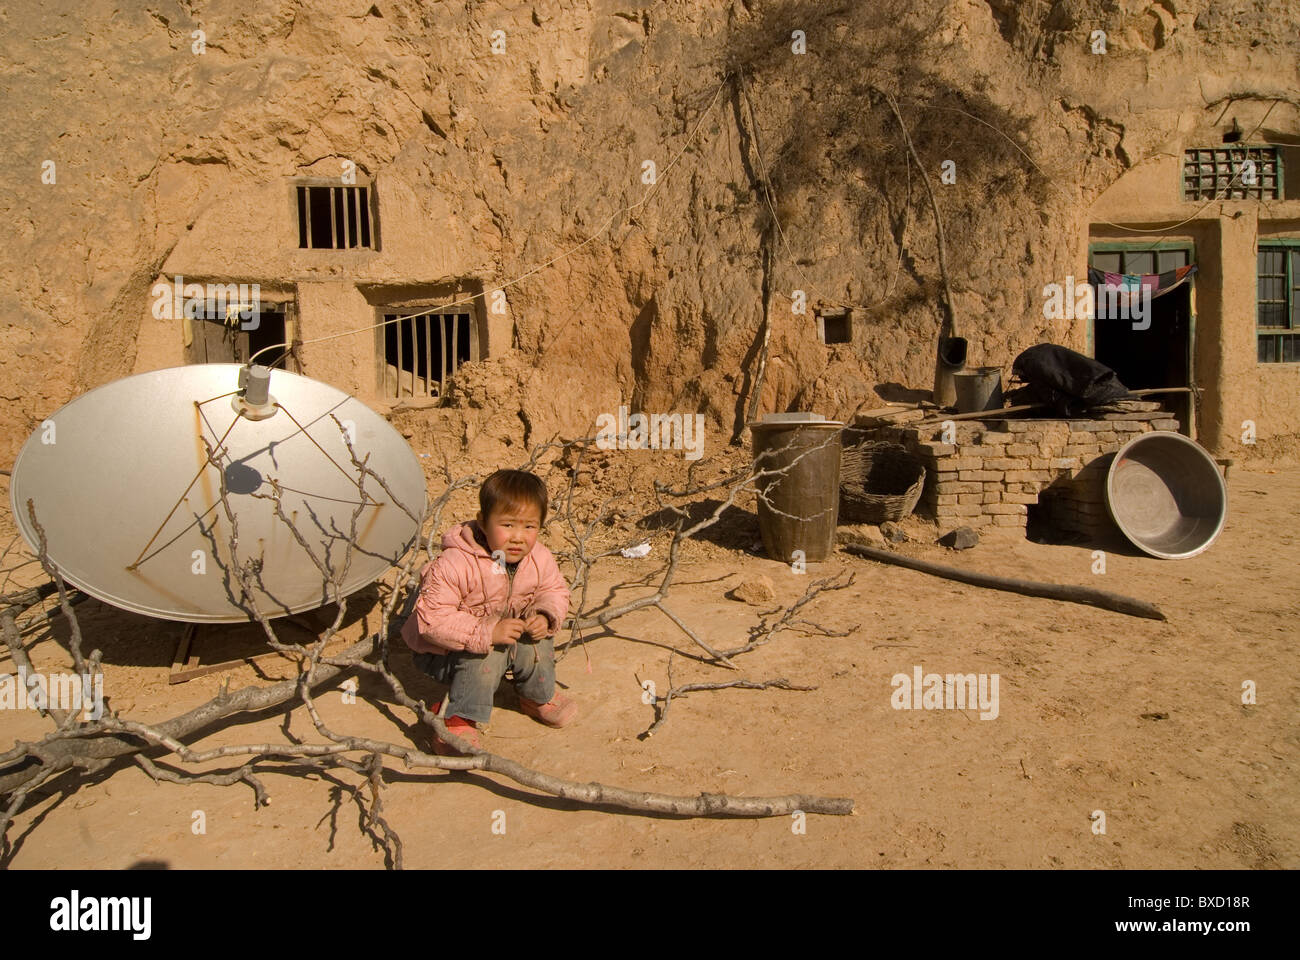 Traditional cave dwellings in Shaanxi province, China. With satellite dish. Stock Photo